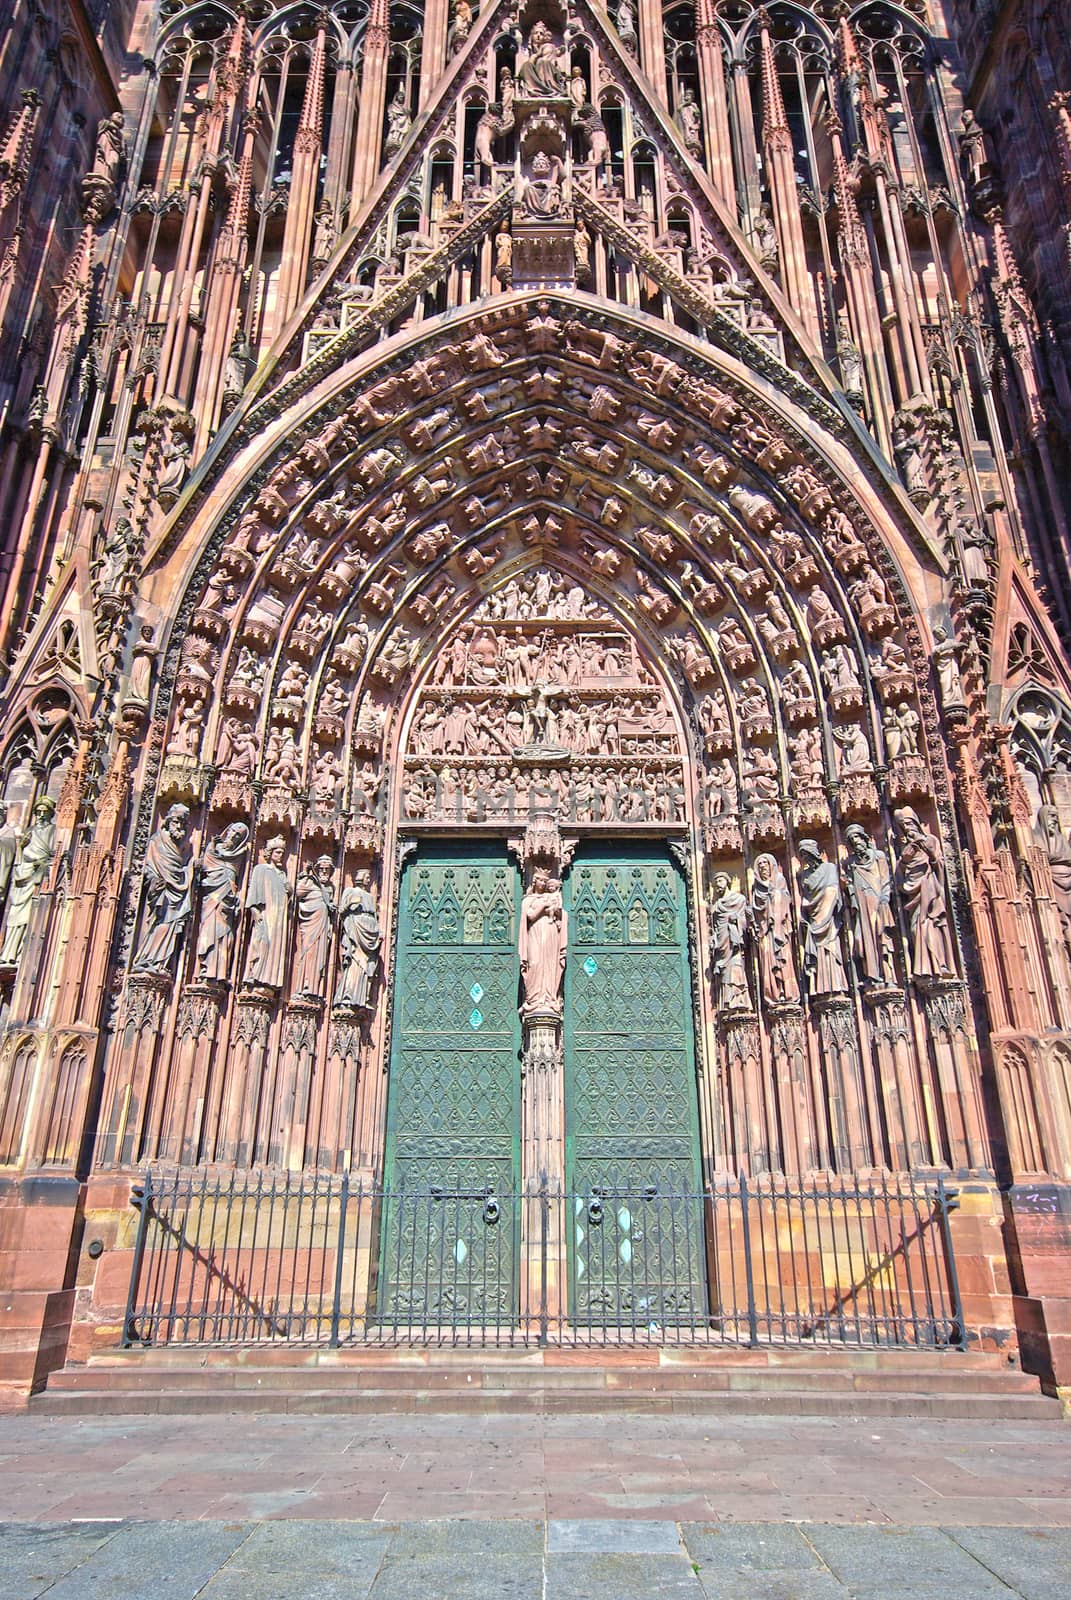 Strasbourg cathedral entrance in France, architecture details.